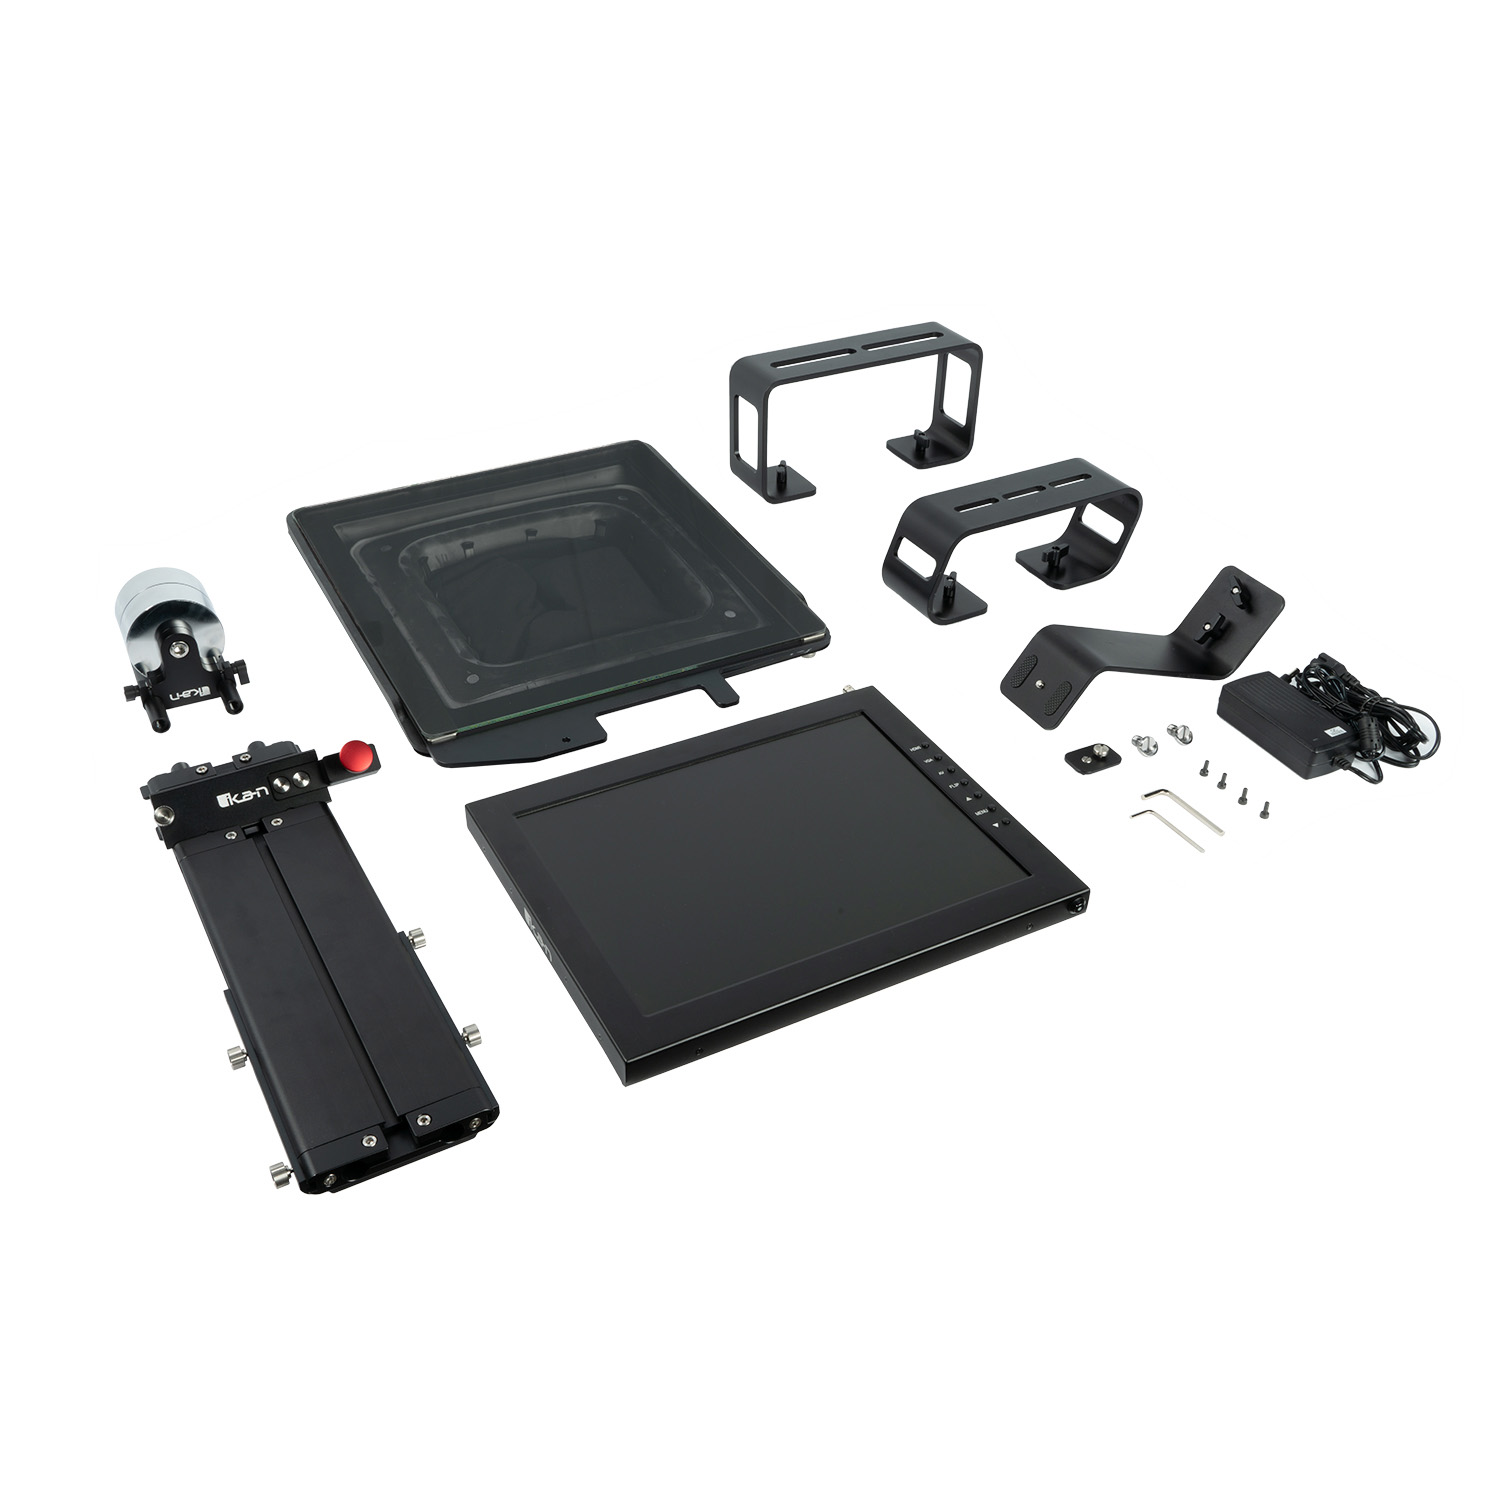 Ikan Professional High-Bright Teleprompter with Talent Monitor Kit (17 ")